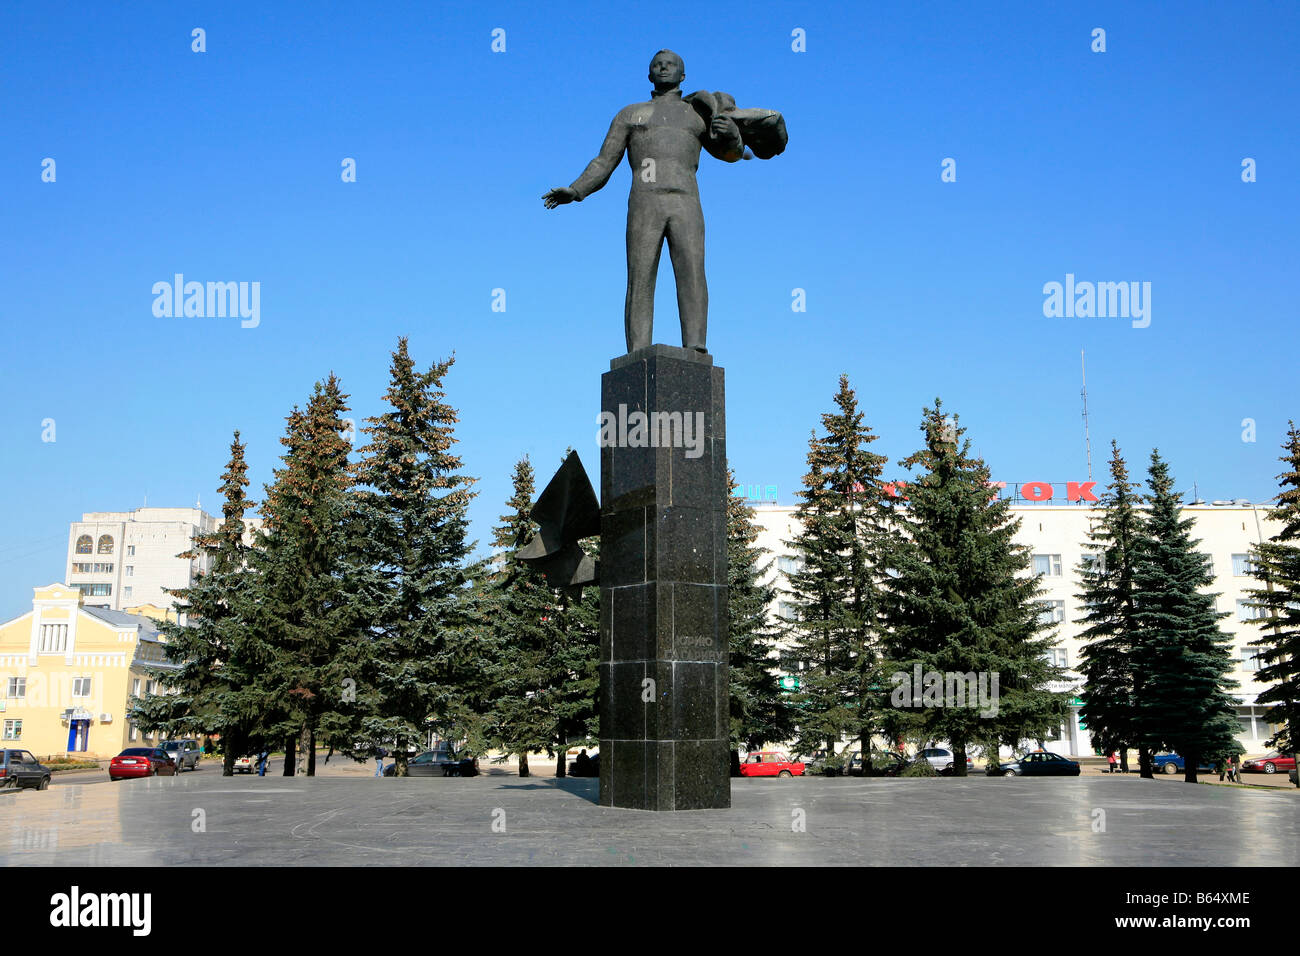 Statue of the world's first human in space cosmonaut Yuri Gagarin at the main square in Gagarin (formerly Klushino), Russia Stock Photo